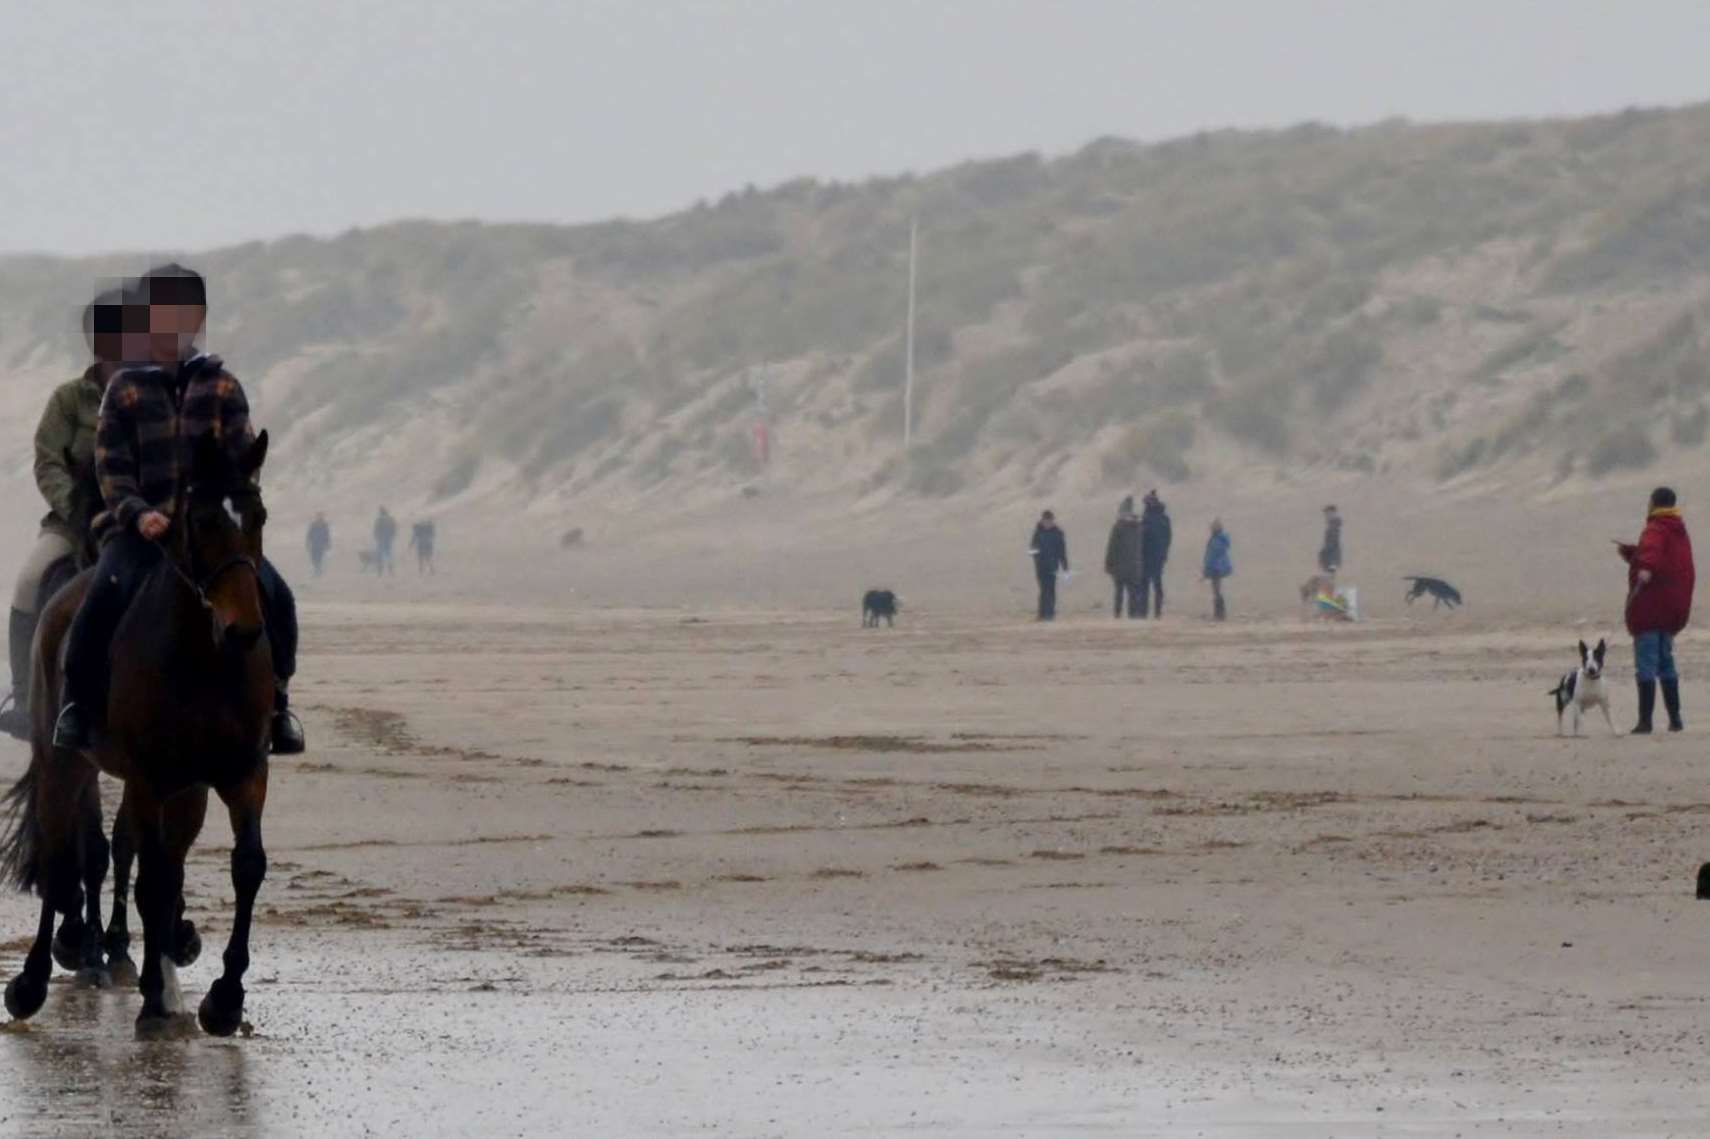 Police were called and took statements from walkers out on the beach on New Year's Eve